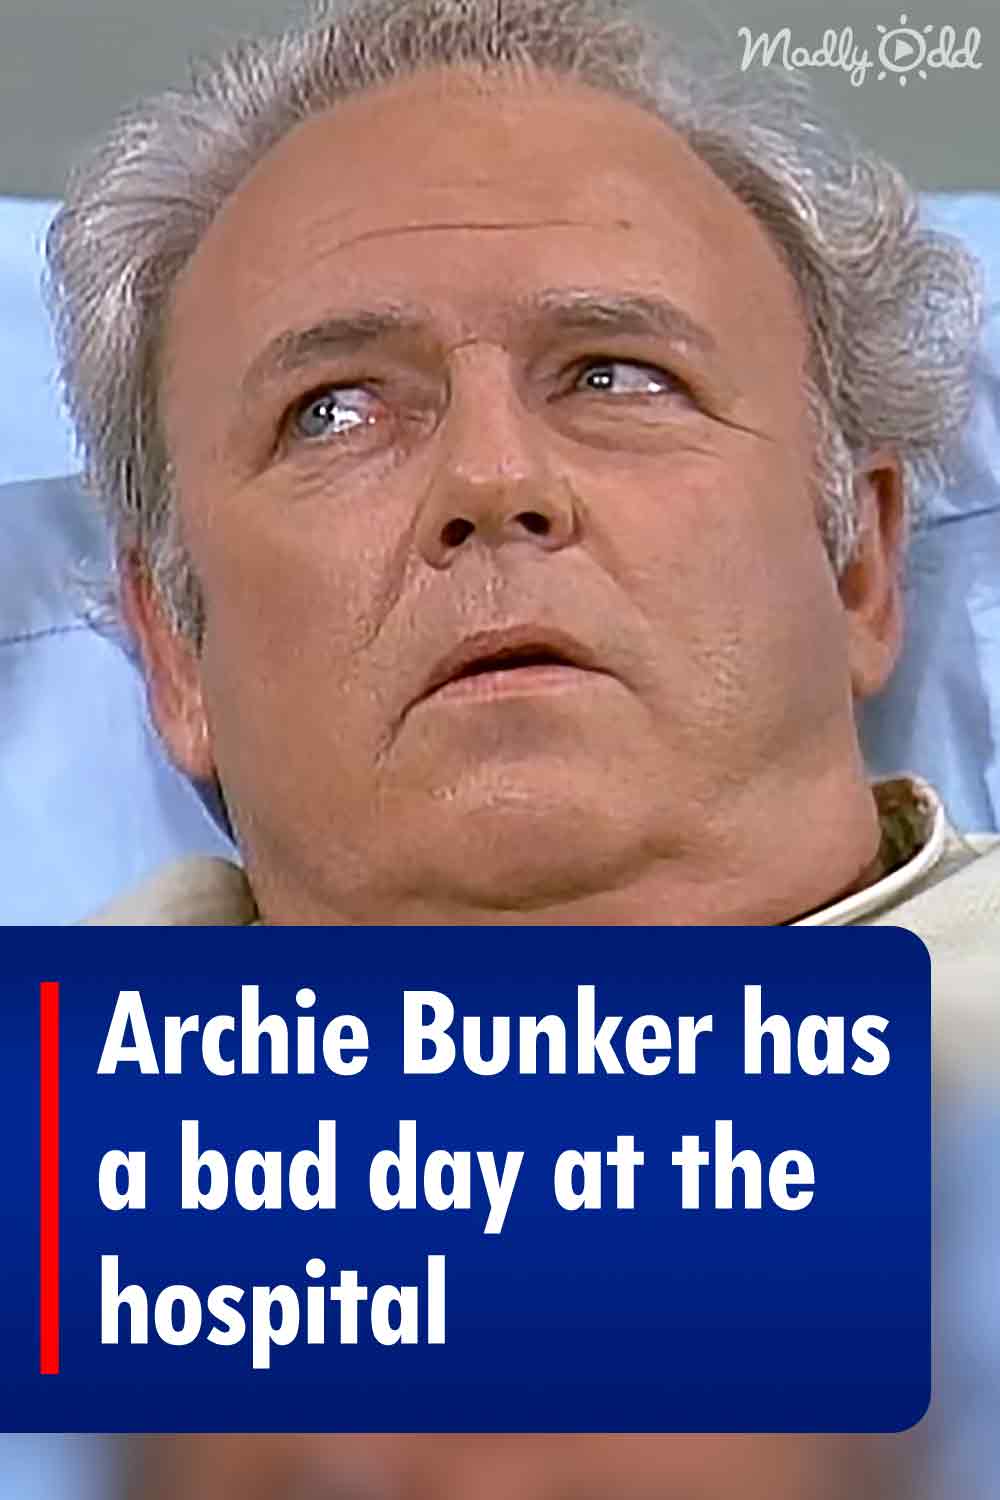 Archie Bunker has a bad day at the hospital